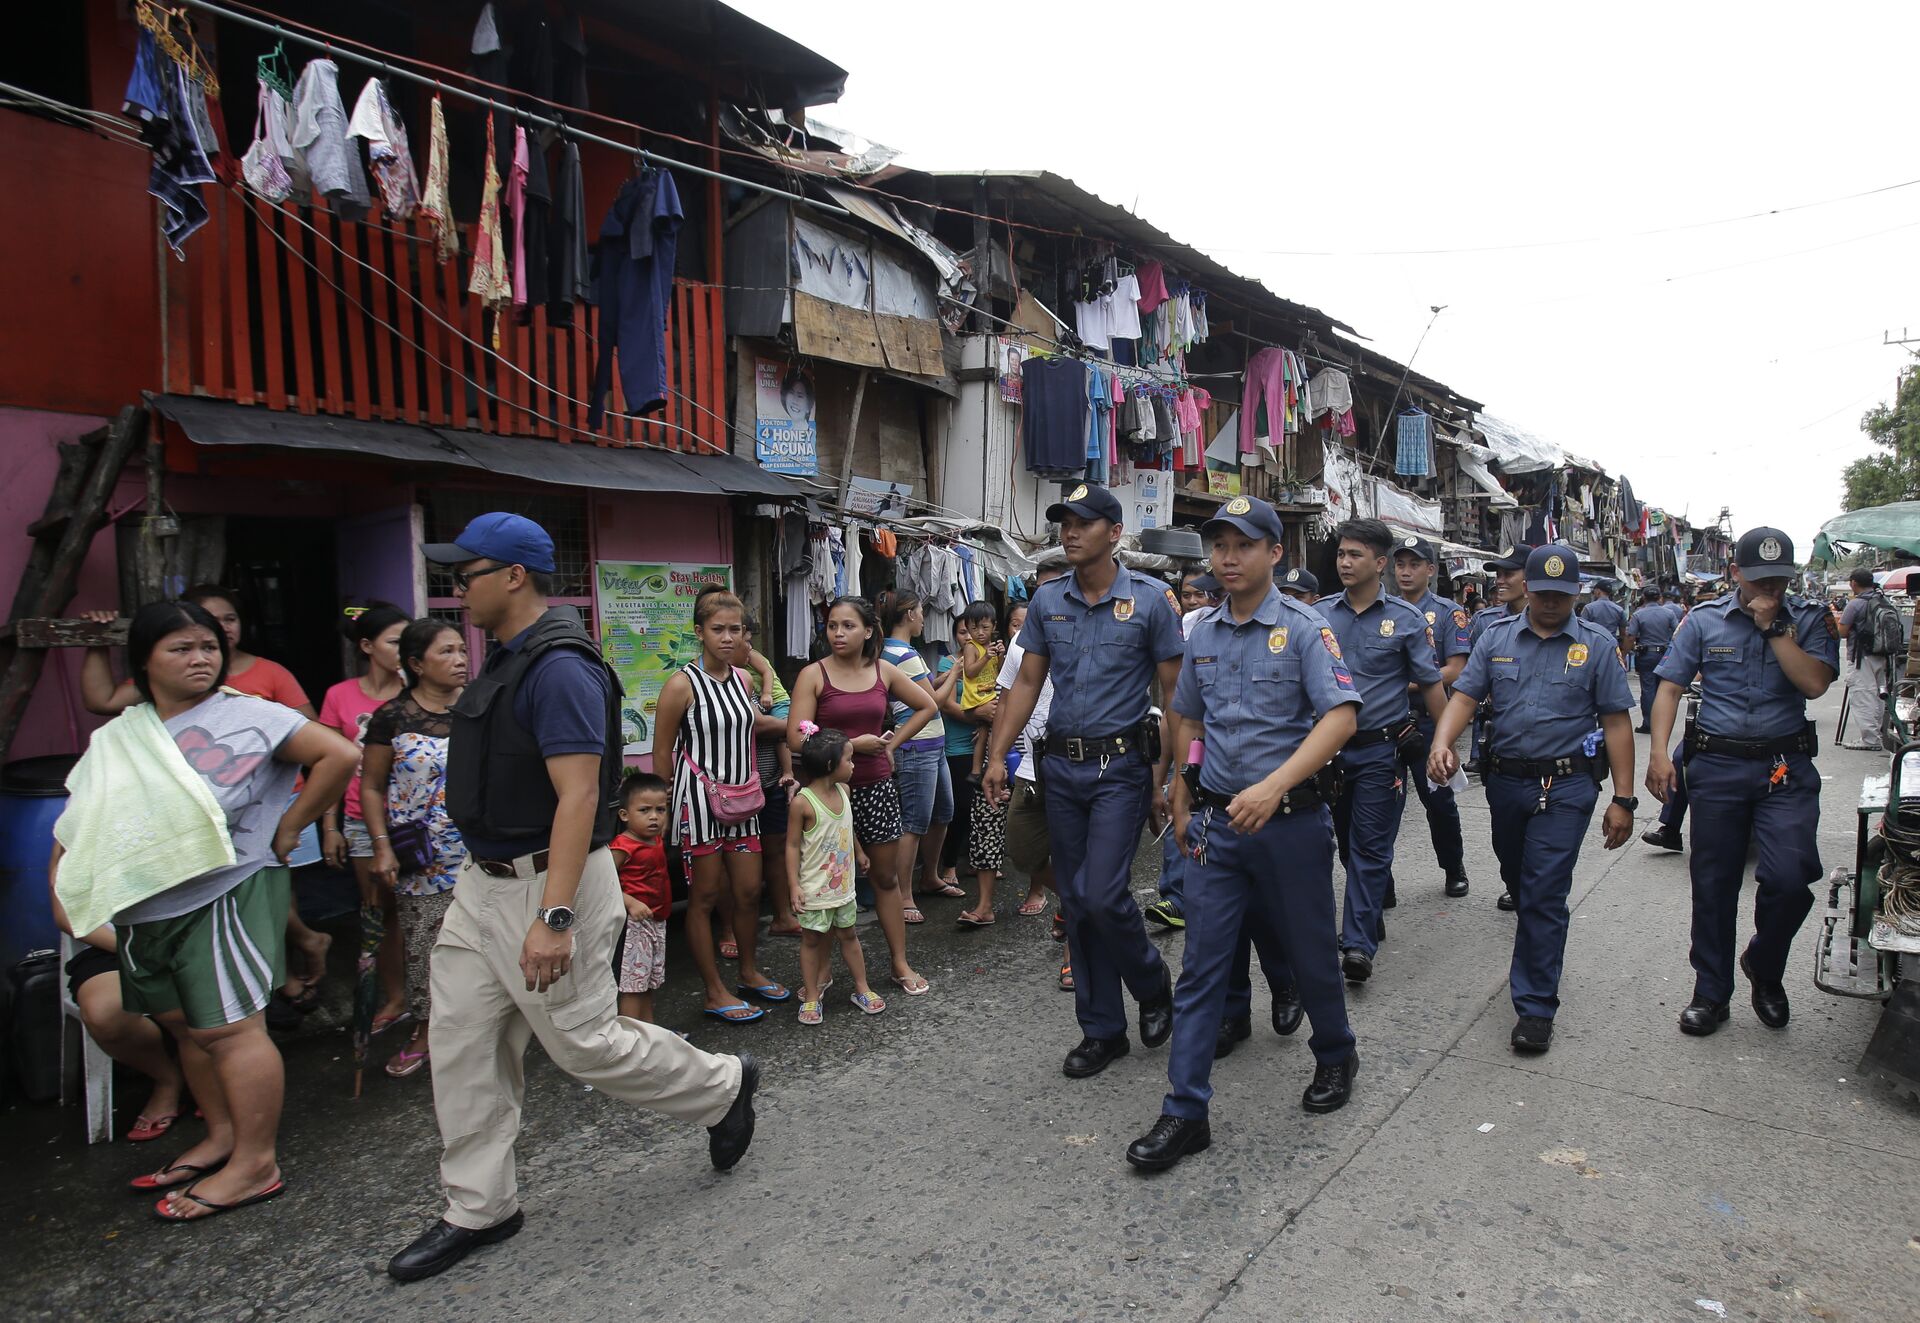 (File) Policemen patrol around a slum area during a police operation as part of the continuing War on Drugs campaign of Philippine President Rodrigo Duterte in Manila, Philippines on Thursday, Oct. 6, 2016 - Sputnik International, 1920, 05.10.2021